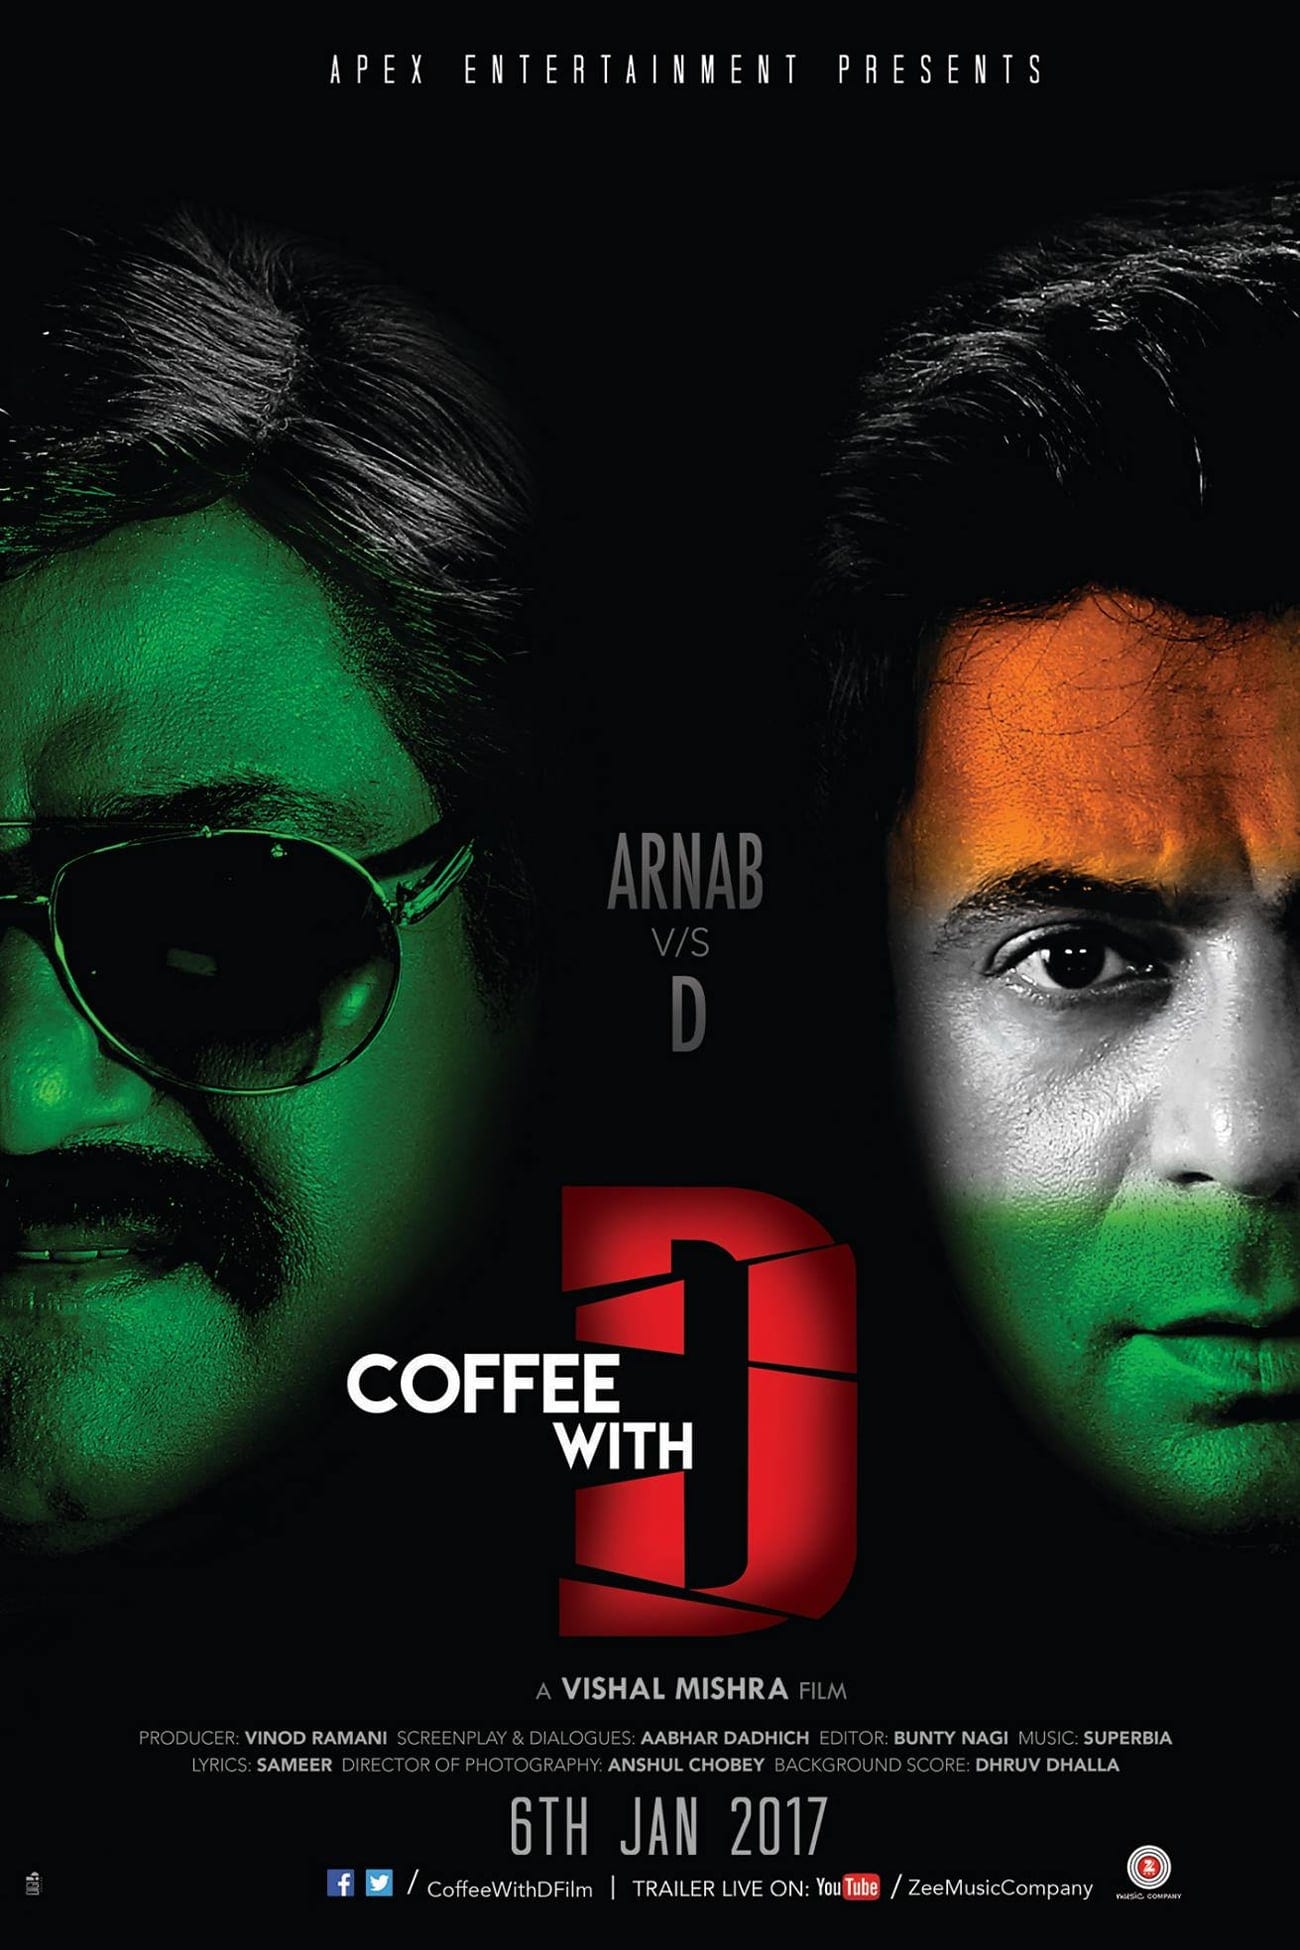 Poster for the movie "Coffee with D"